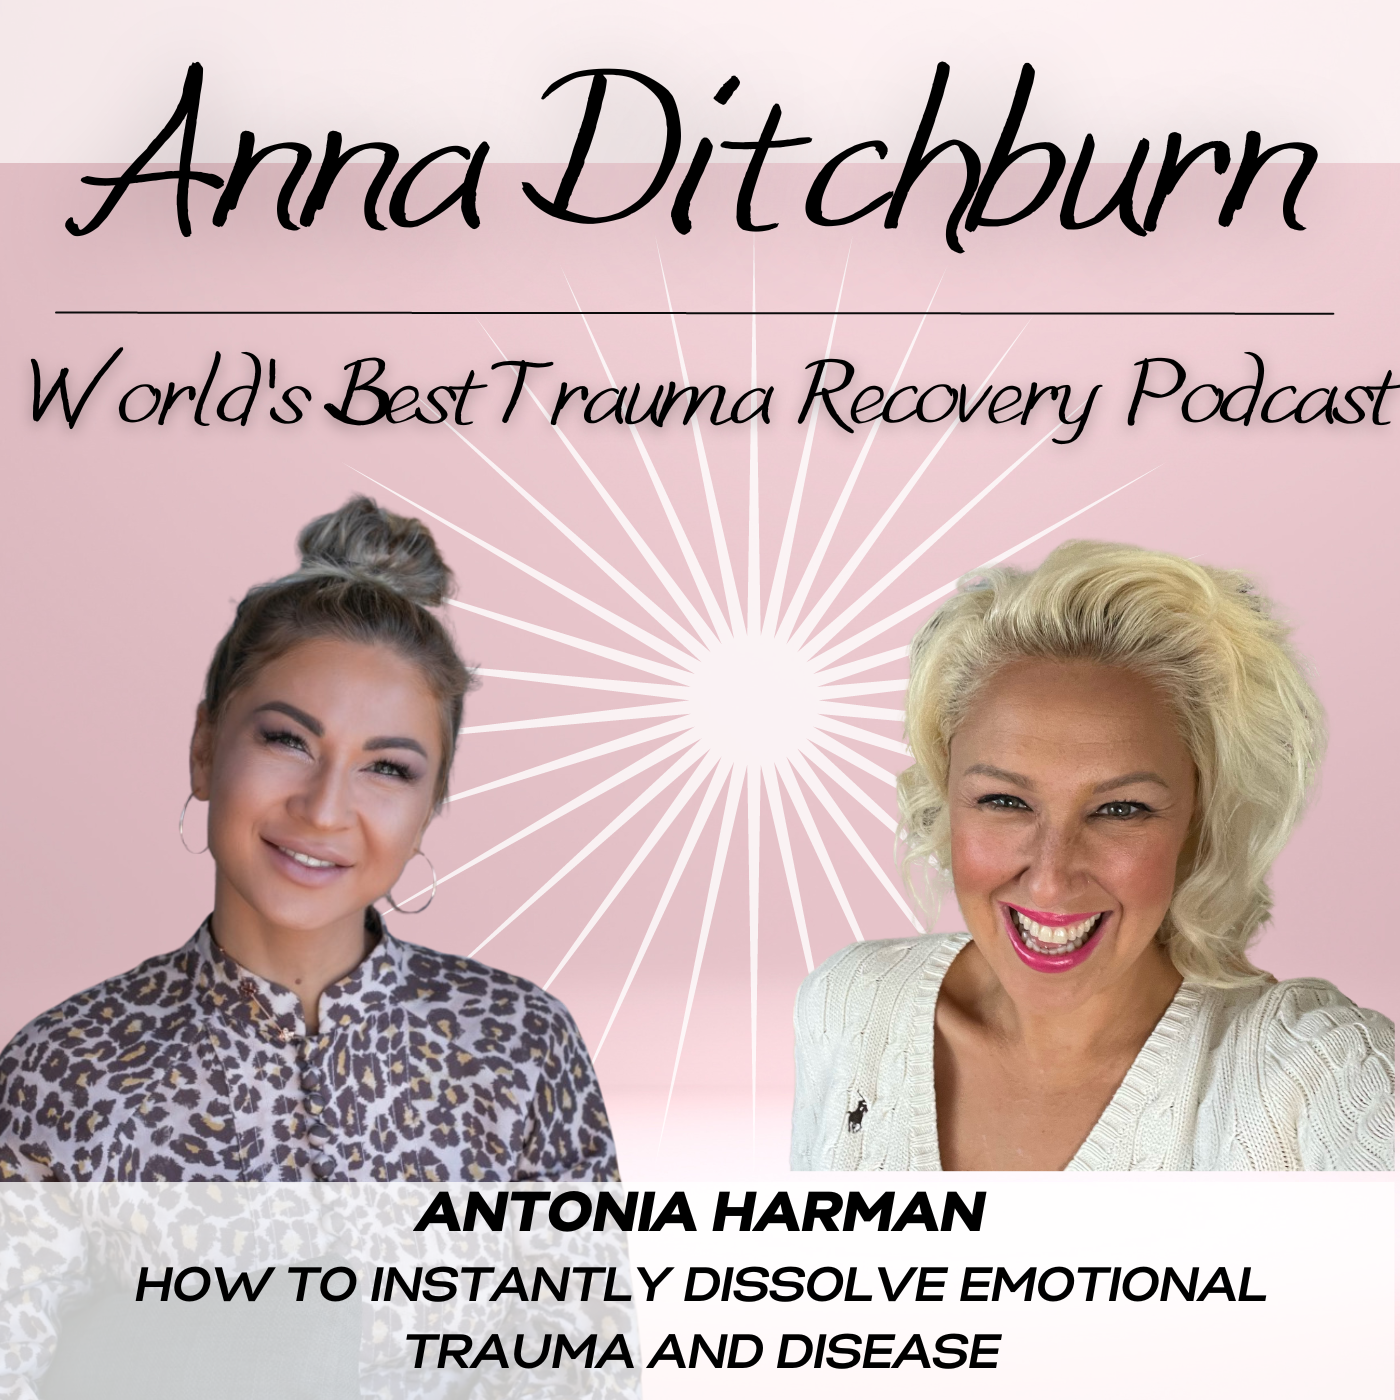 How To Instantly Dissolve Emotional Trauma and Disease